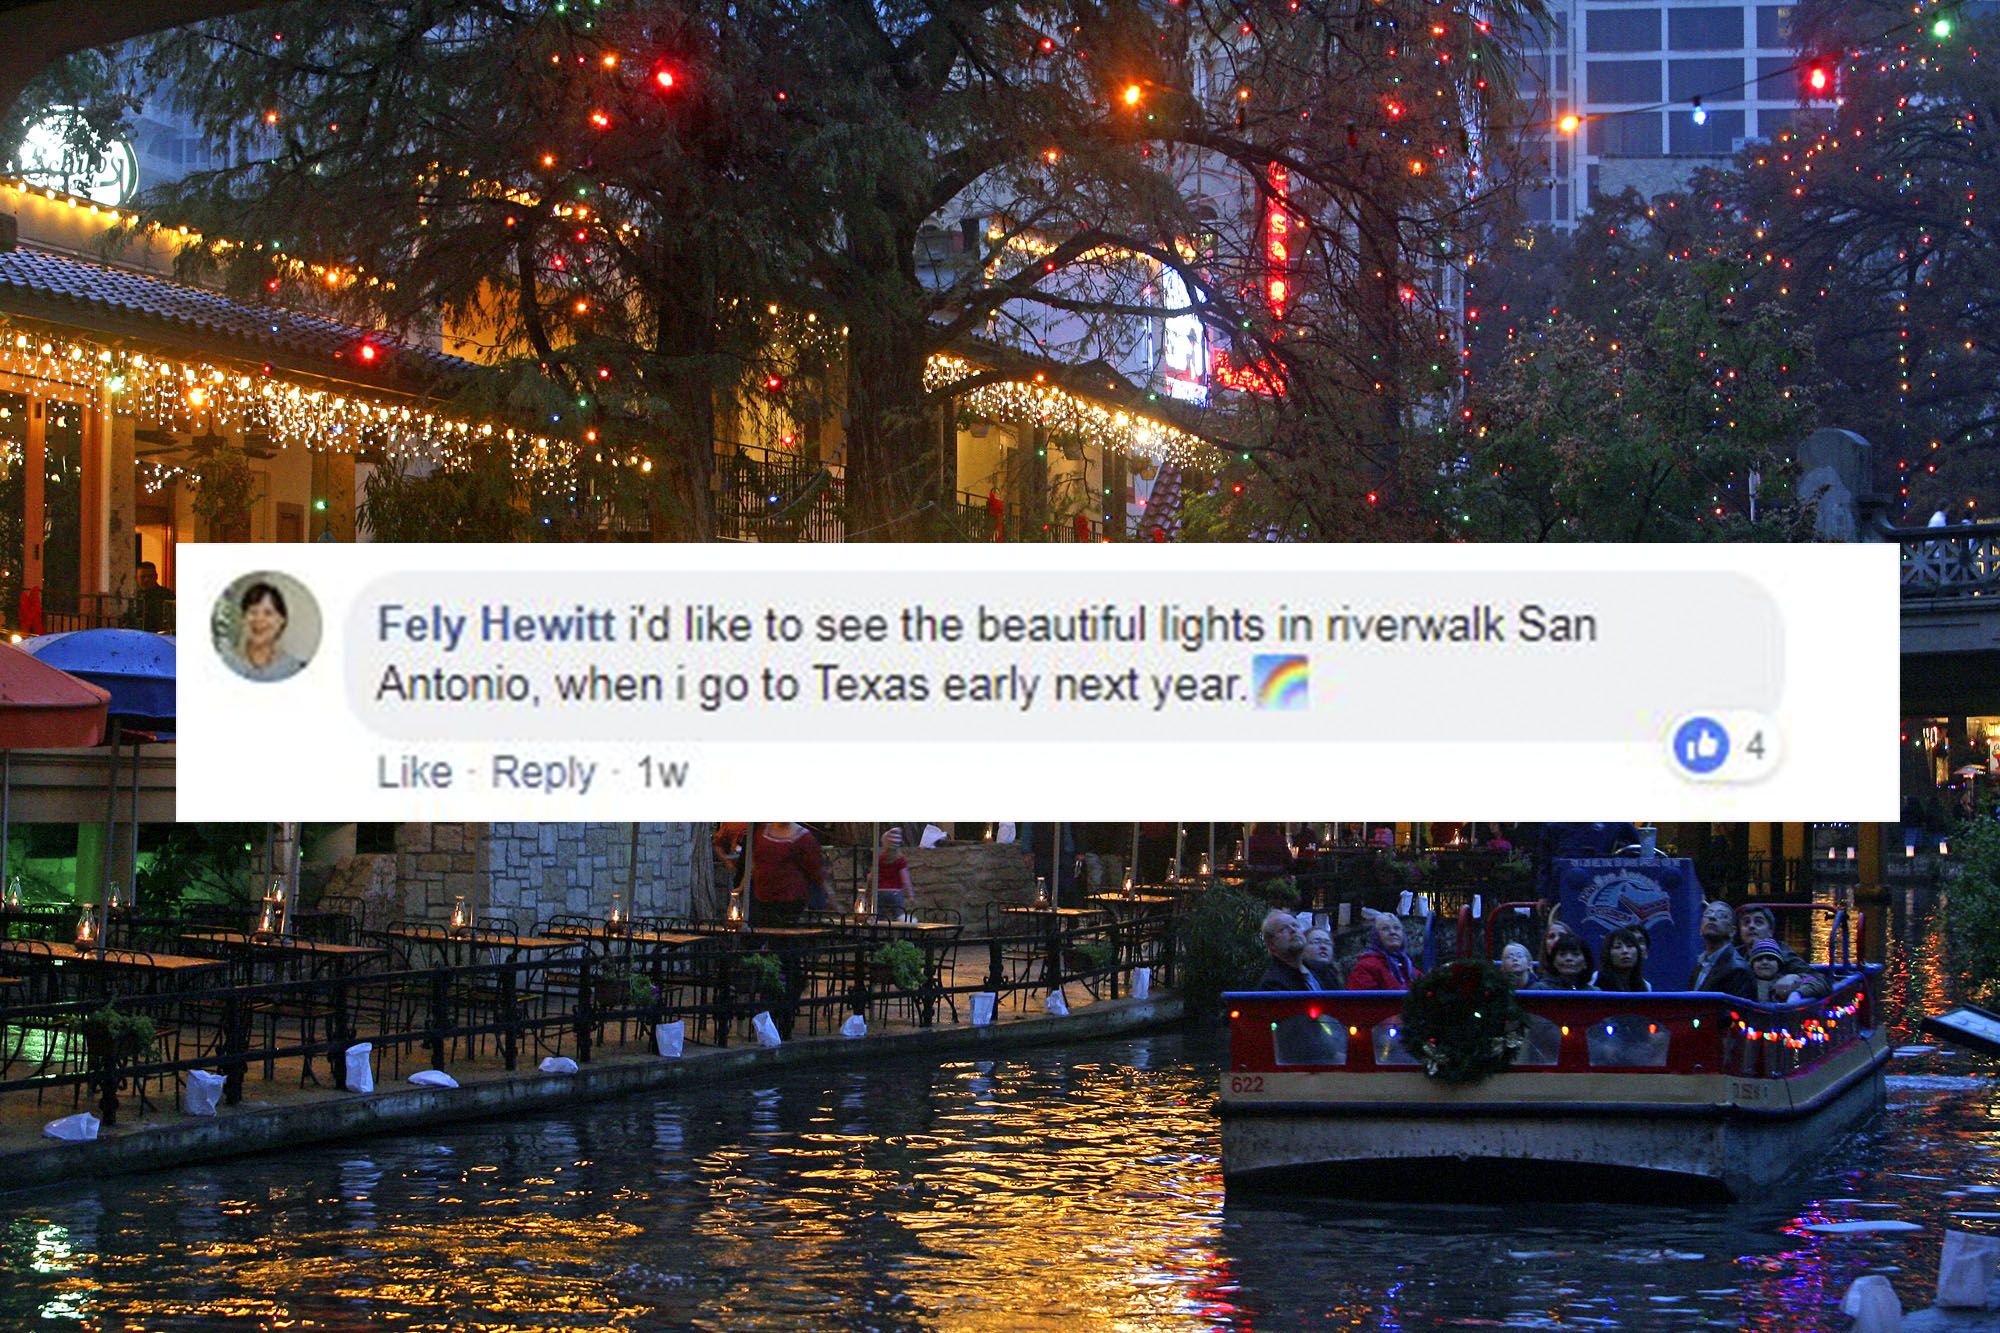 San Antonio River Walk holiday lights tradition continues after